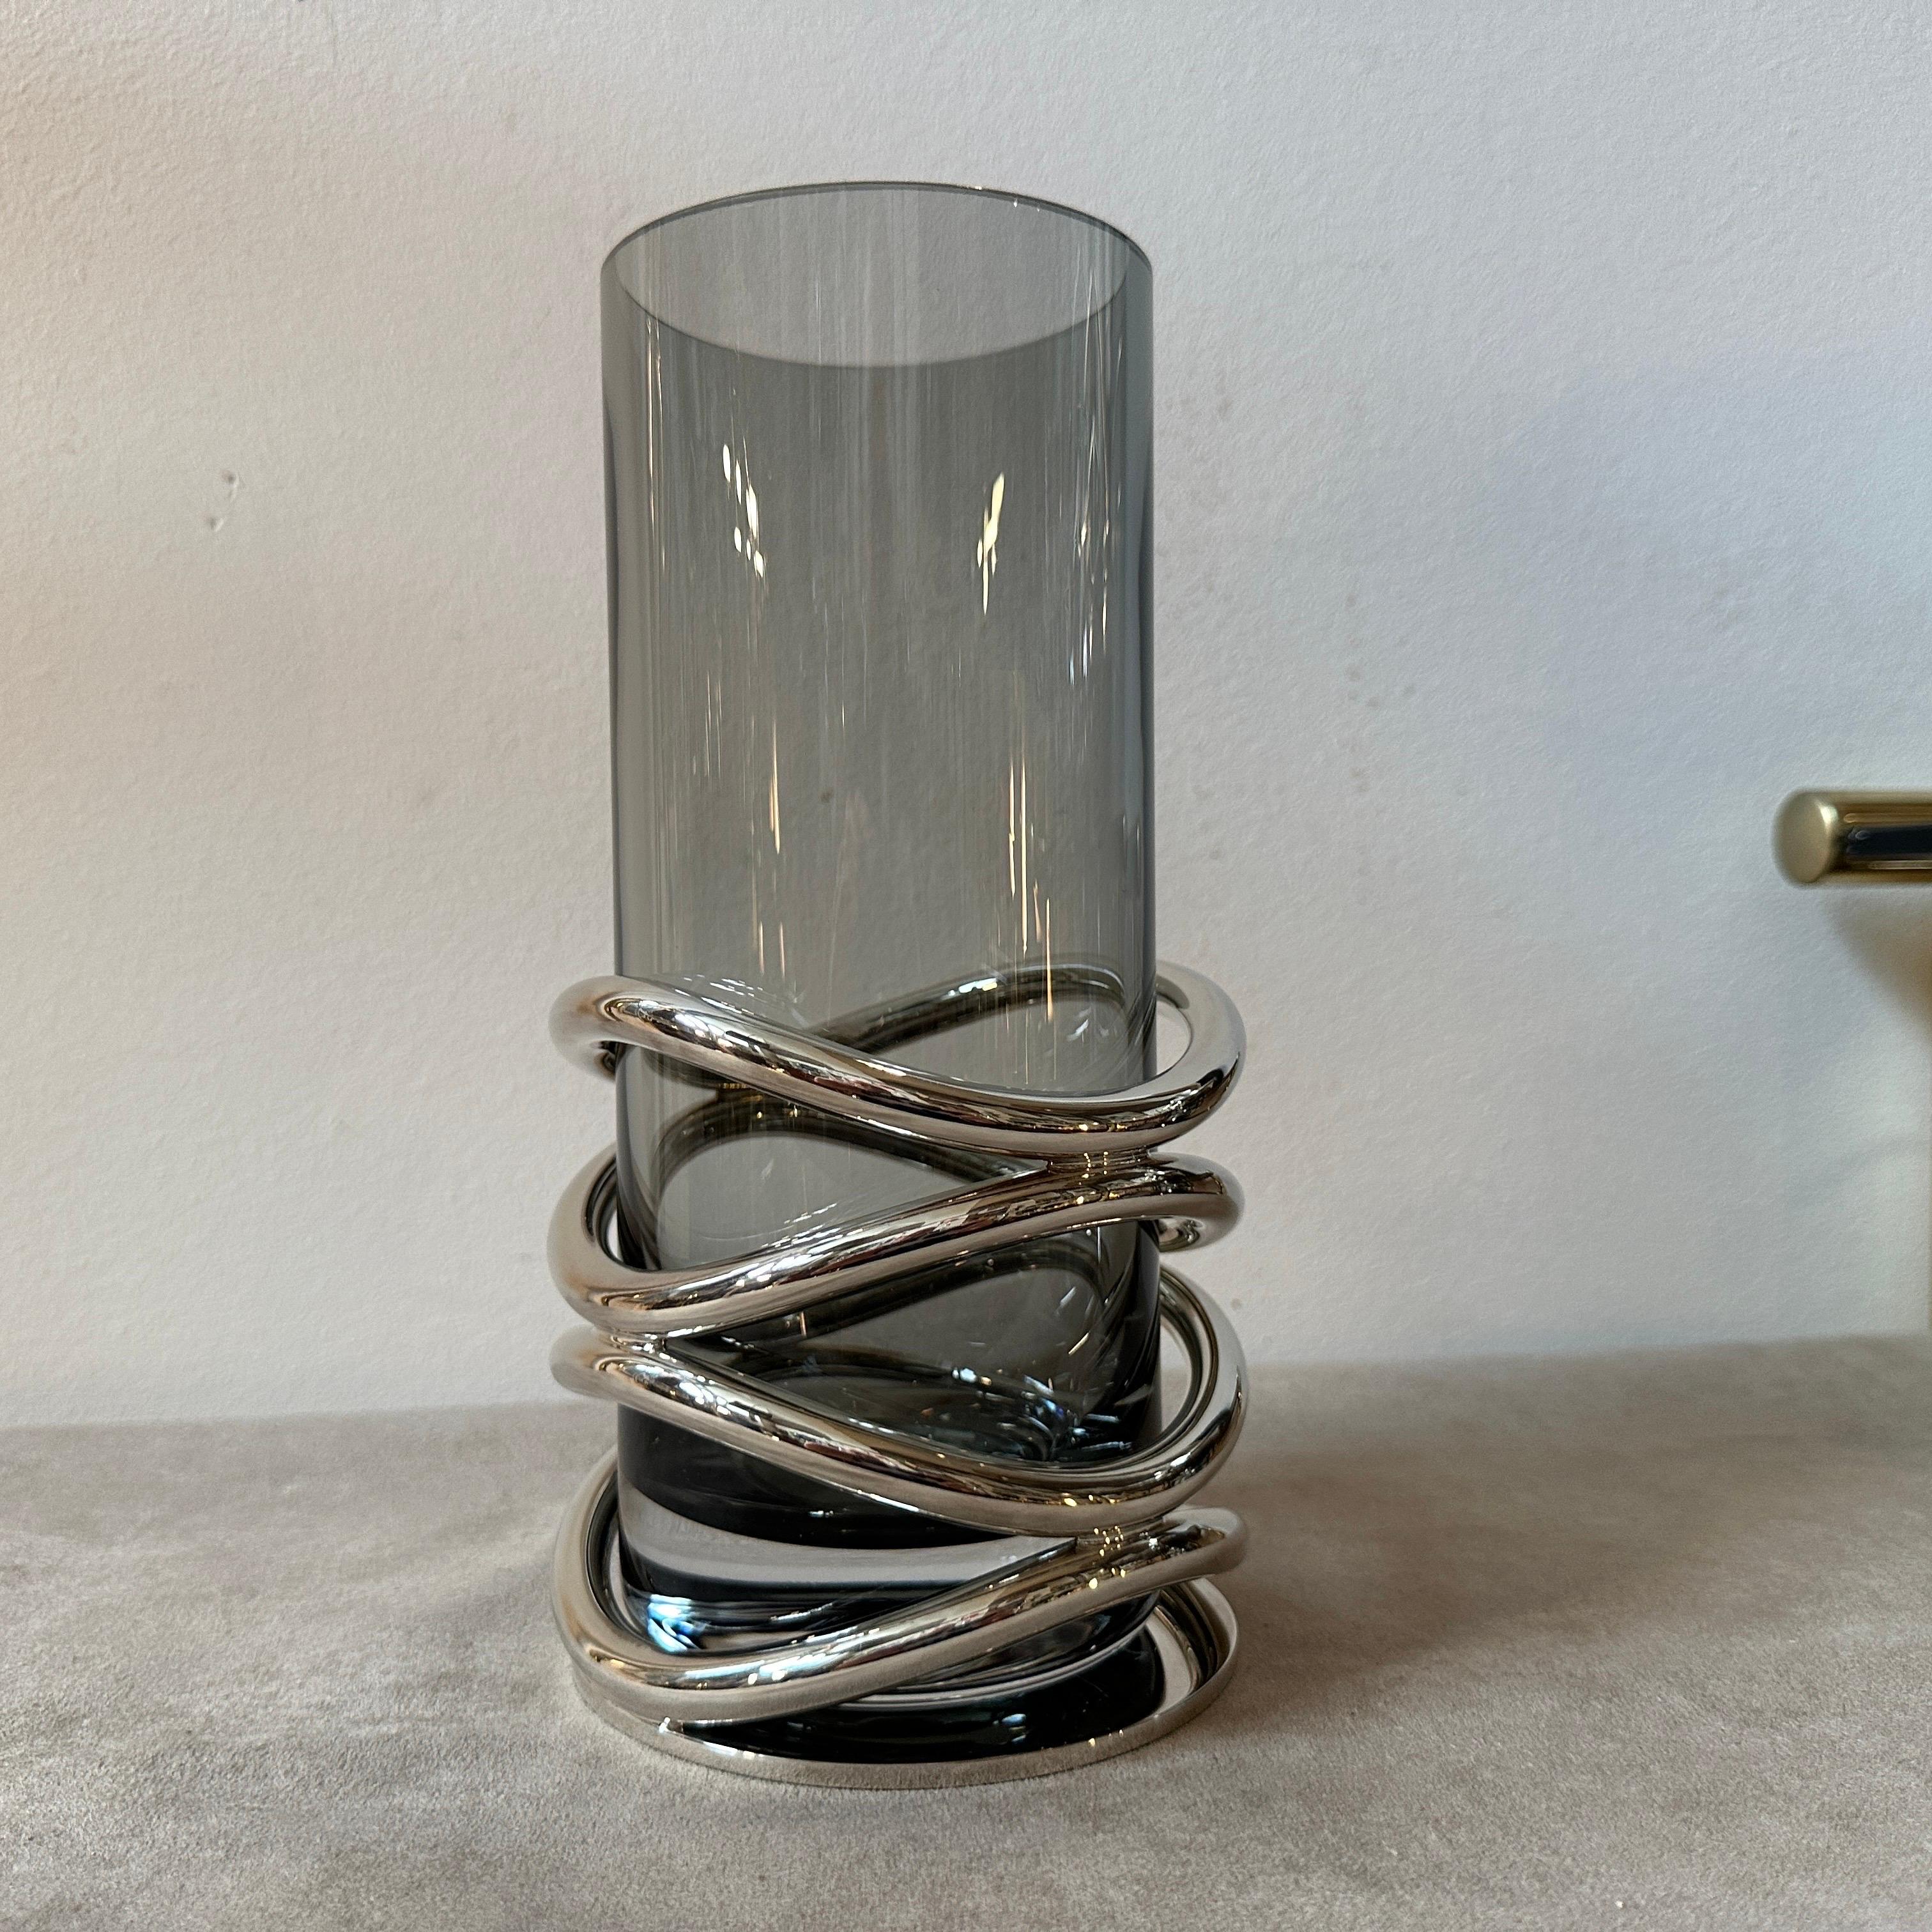 1990s Modernist Silver Plated and Smoked Glass Thomas French Vase by Christofle For Sale 1